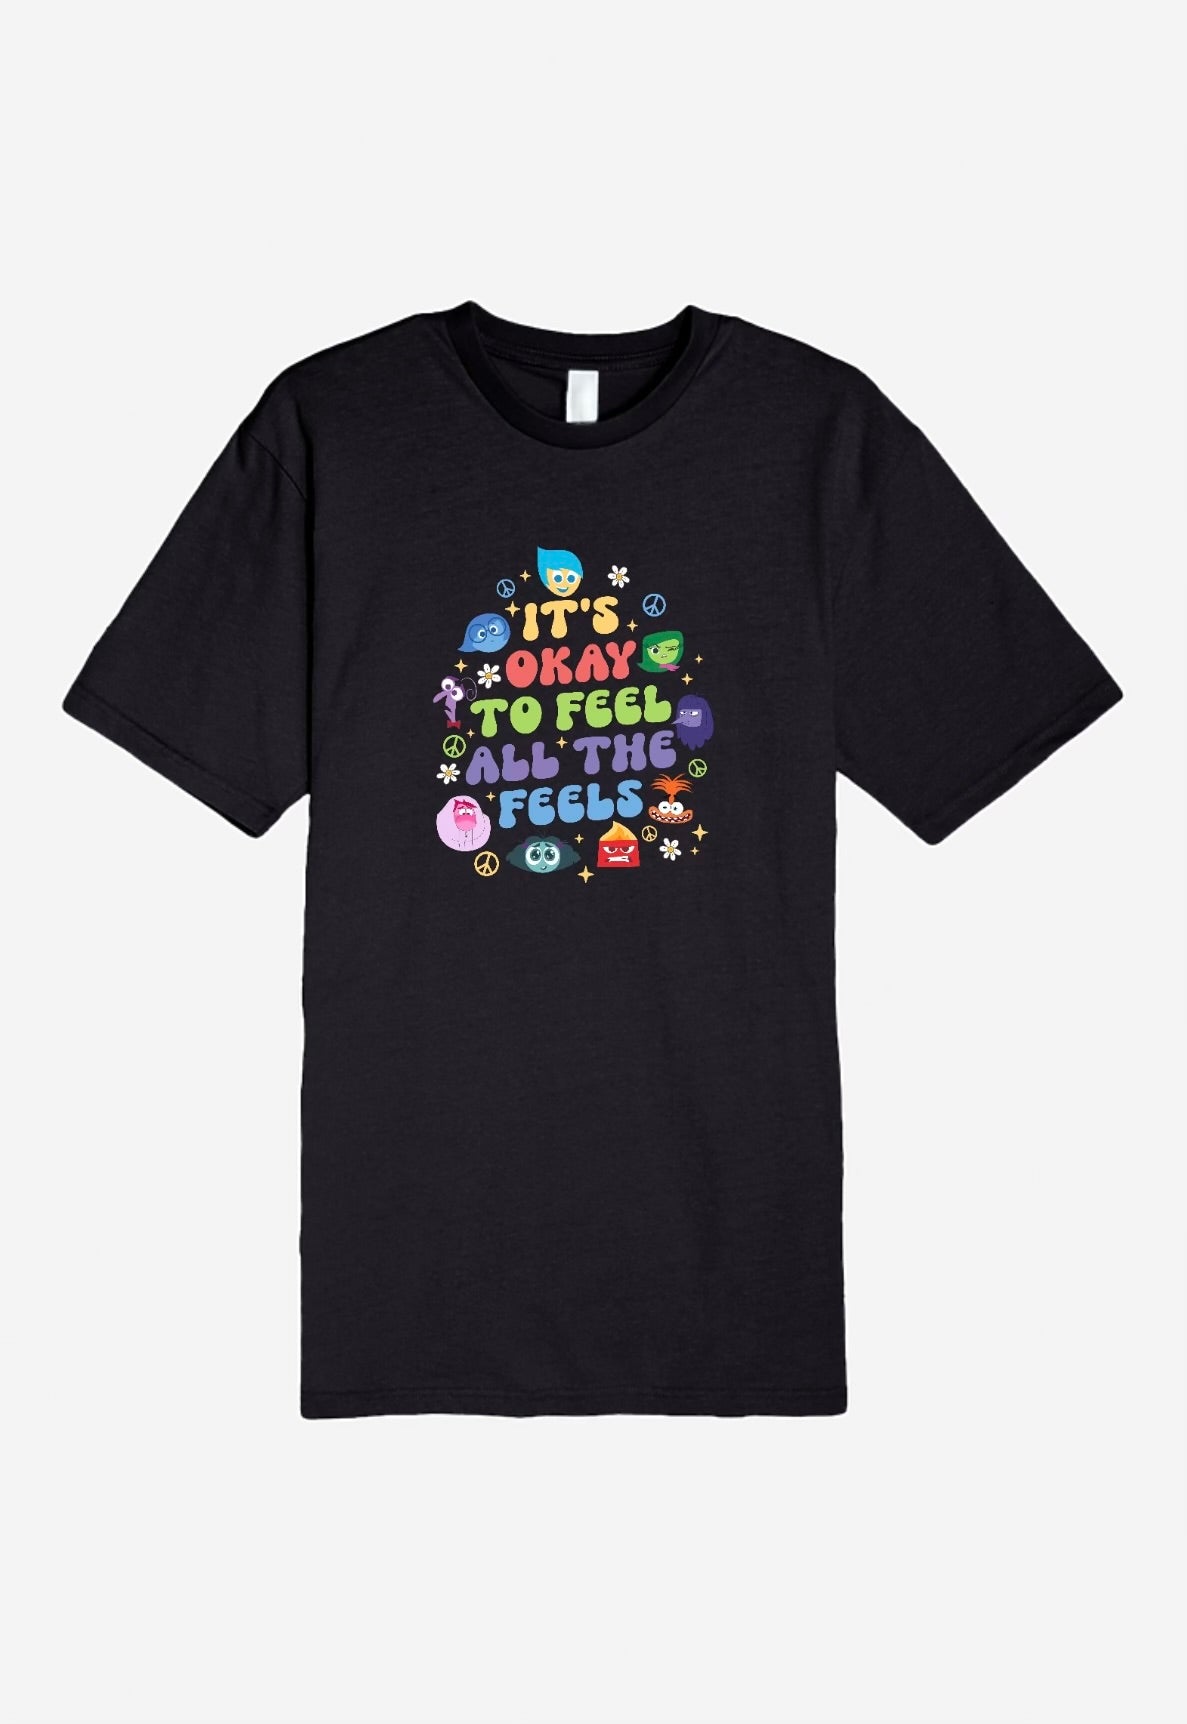 Inside Out T-Shirt